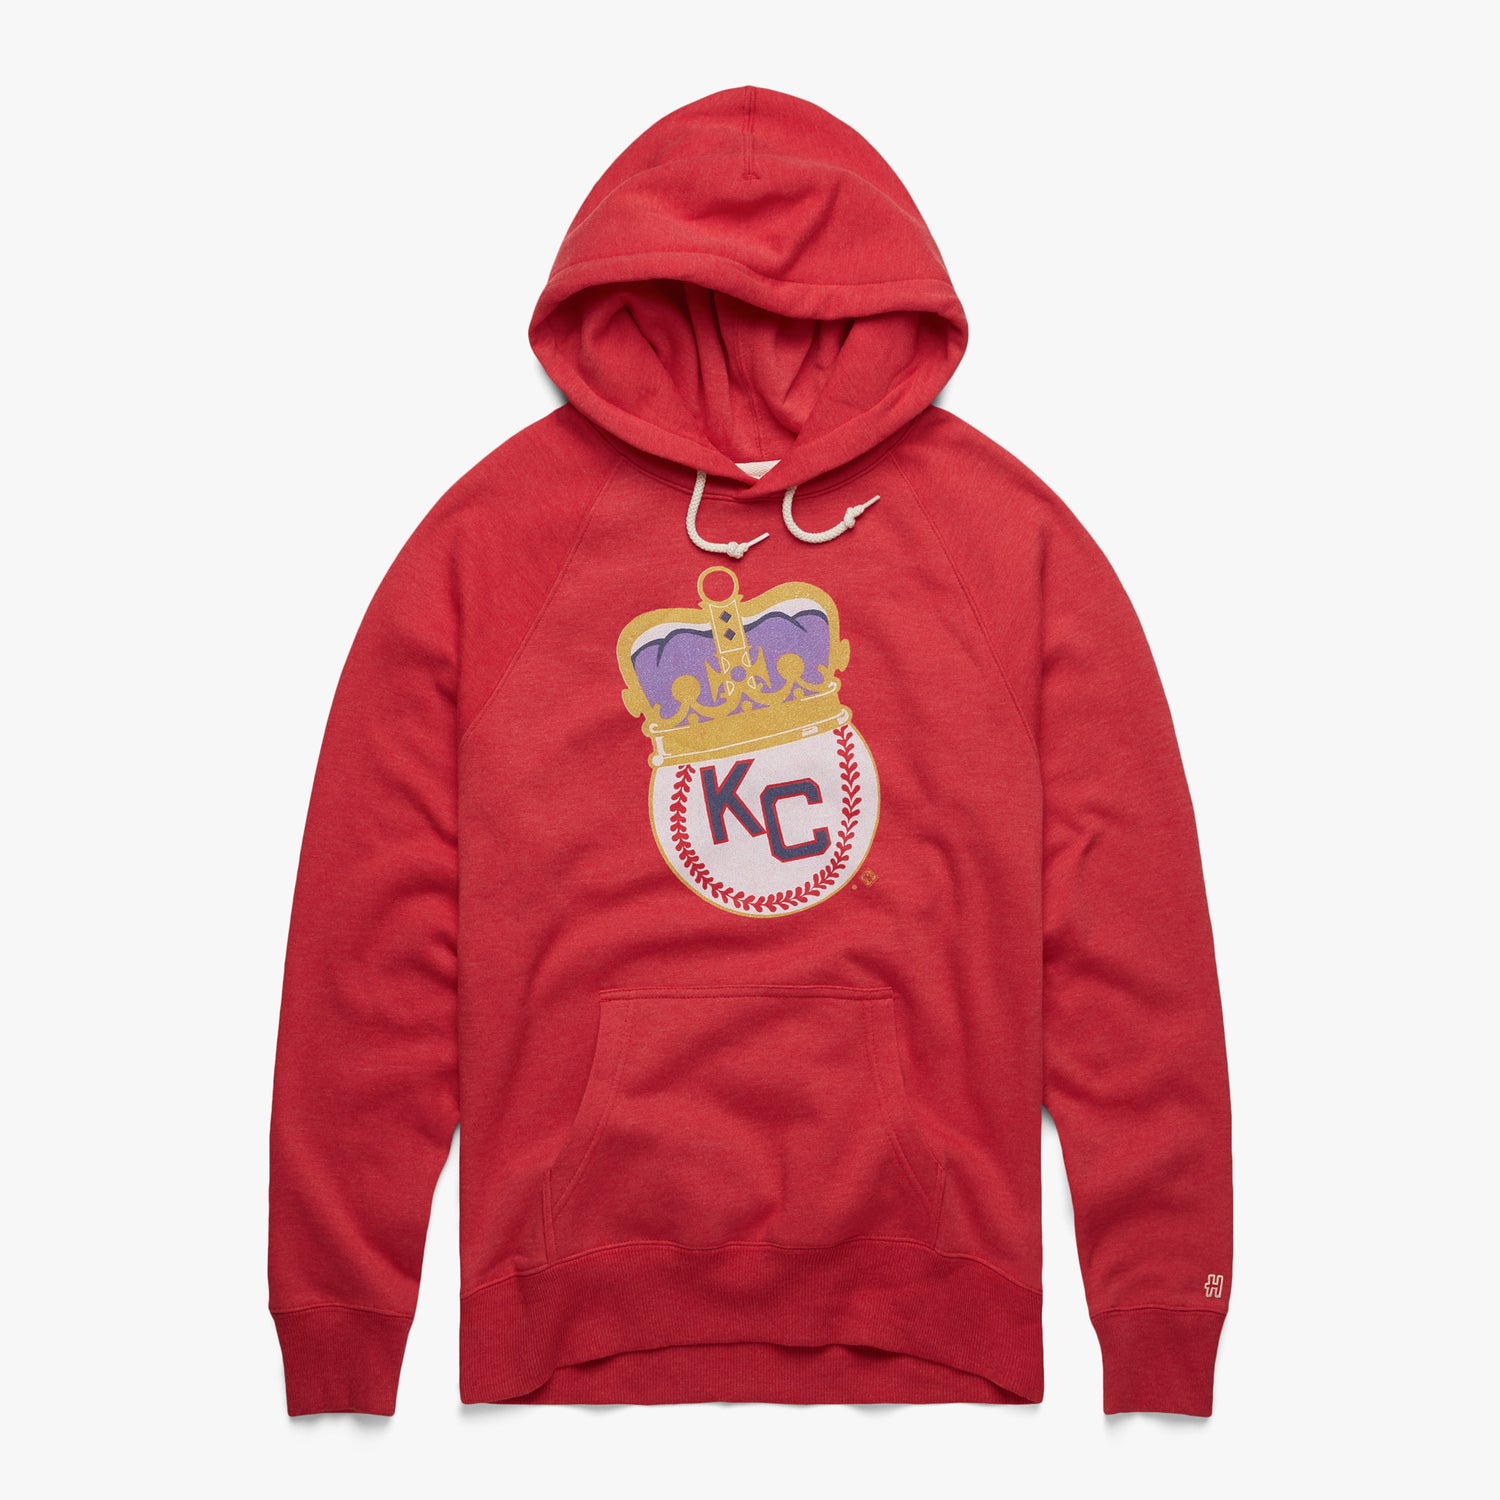 Kansas City Monarchs Hoodie from Homage. | Red | Vintage Apparel from Homage.